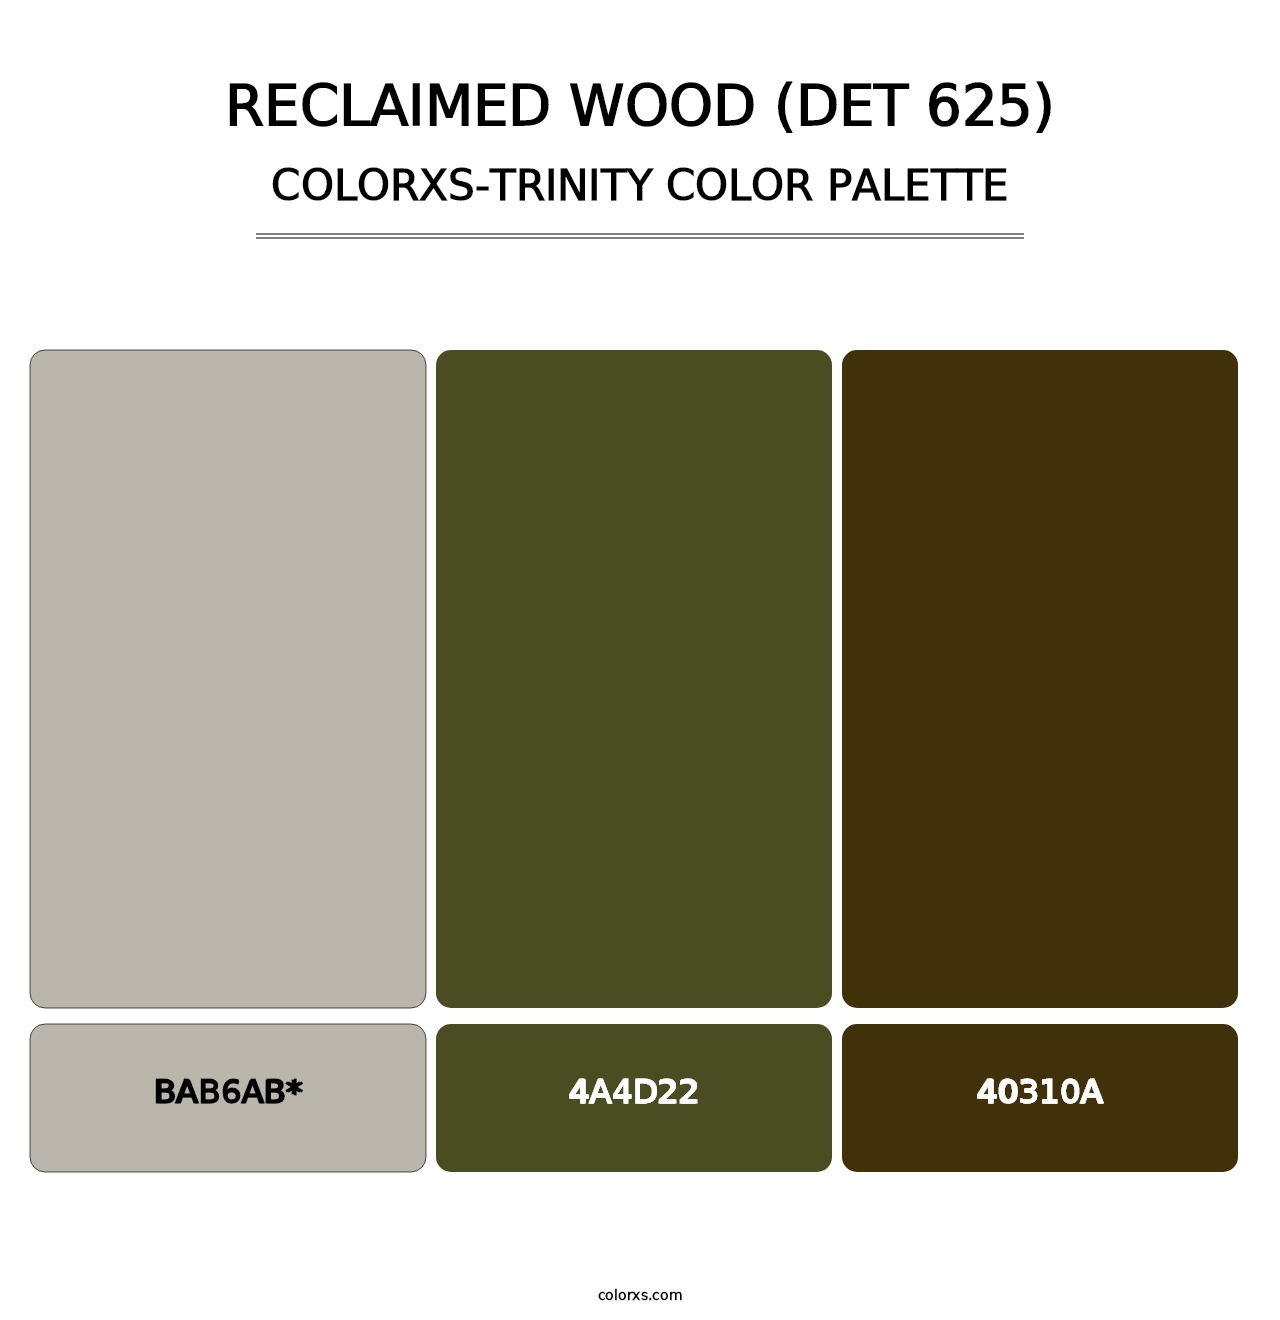 Reclaimed Wood (DET 625) - Colorxs Trinity Palette